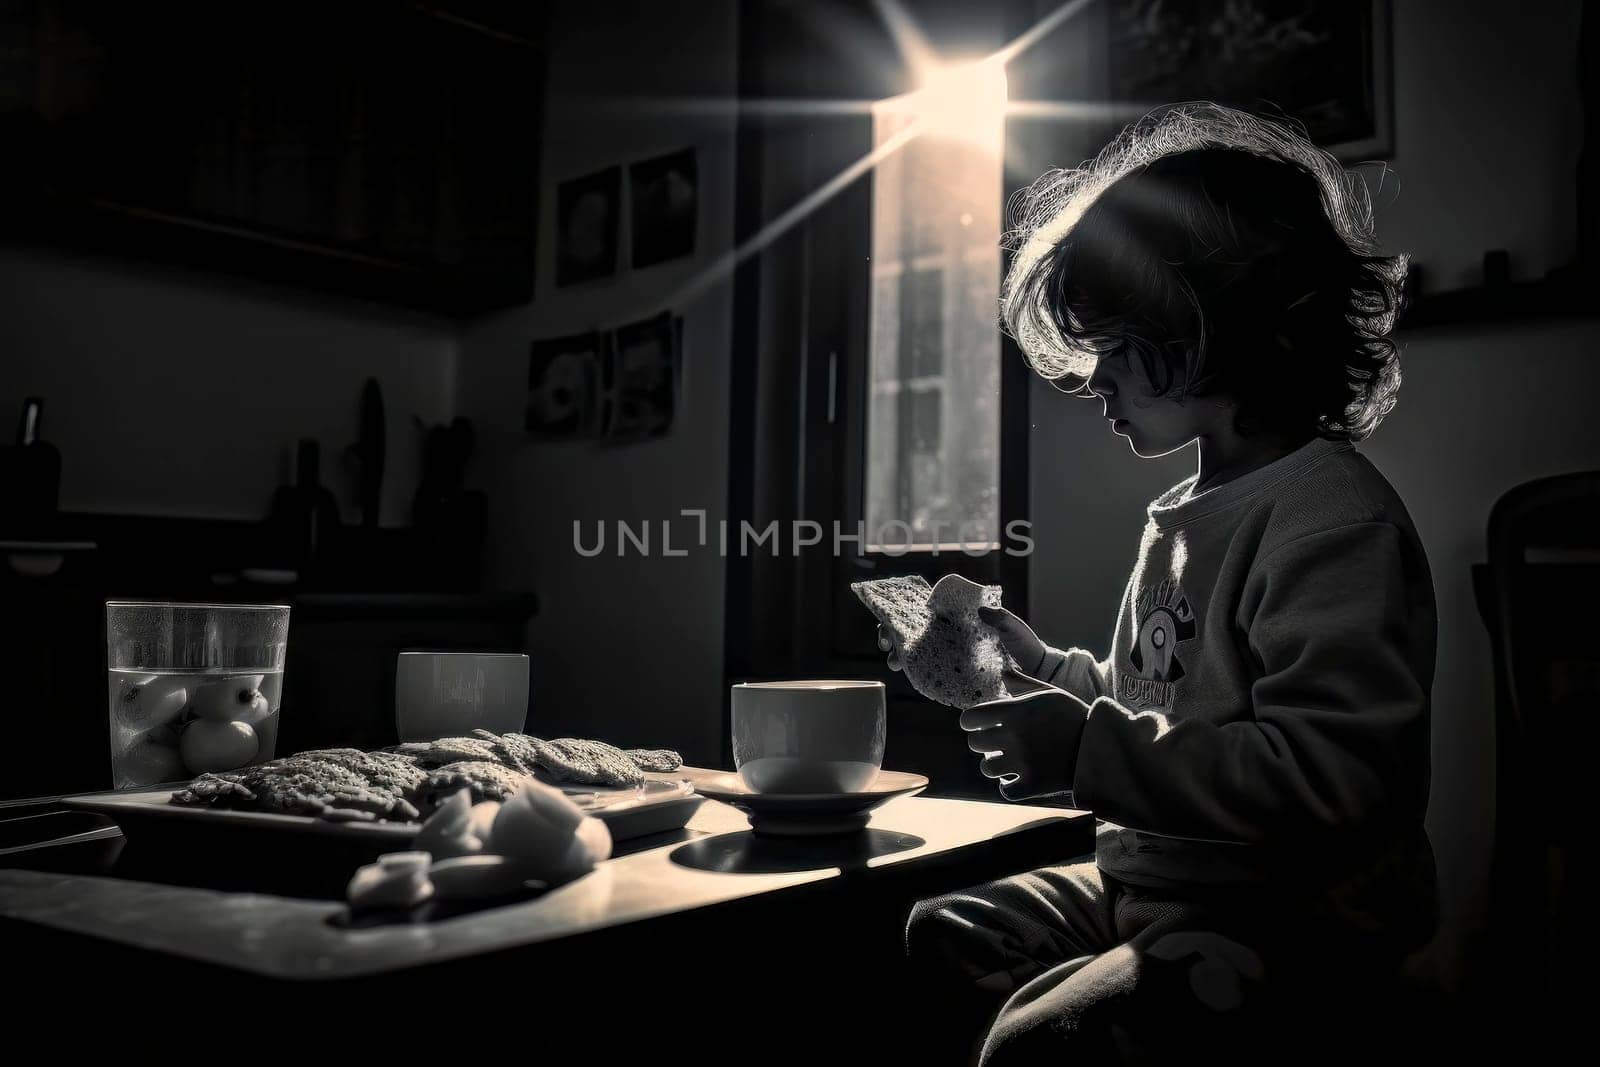 child eating alone in a dimly lit house by pippocarlot